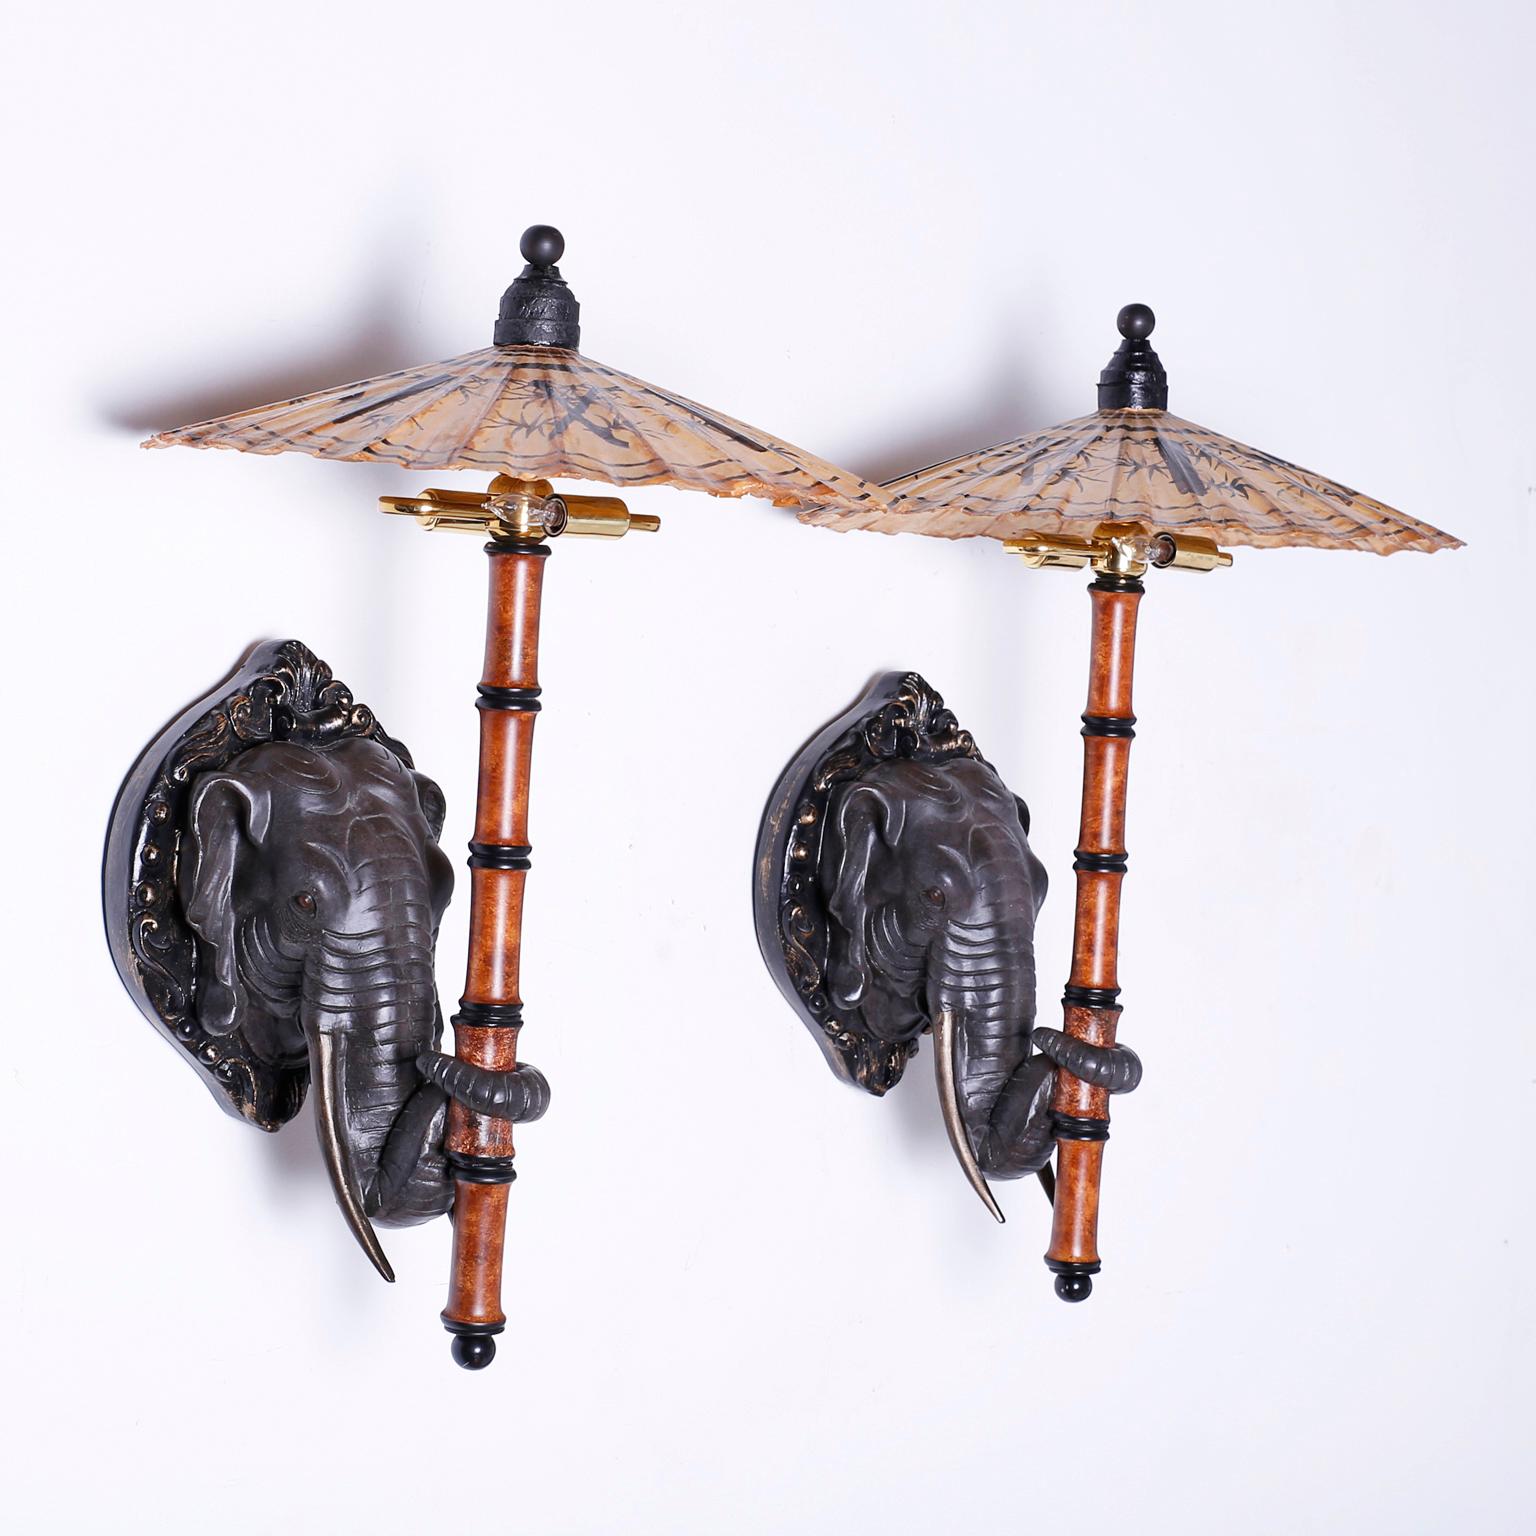 Enchanting pair of electrified wall sconces crafted in composition, depicting an elephant holding a bamboo and lacquered paper umbrella with his trunk.